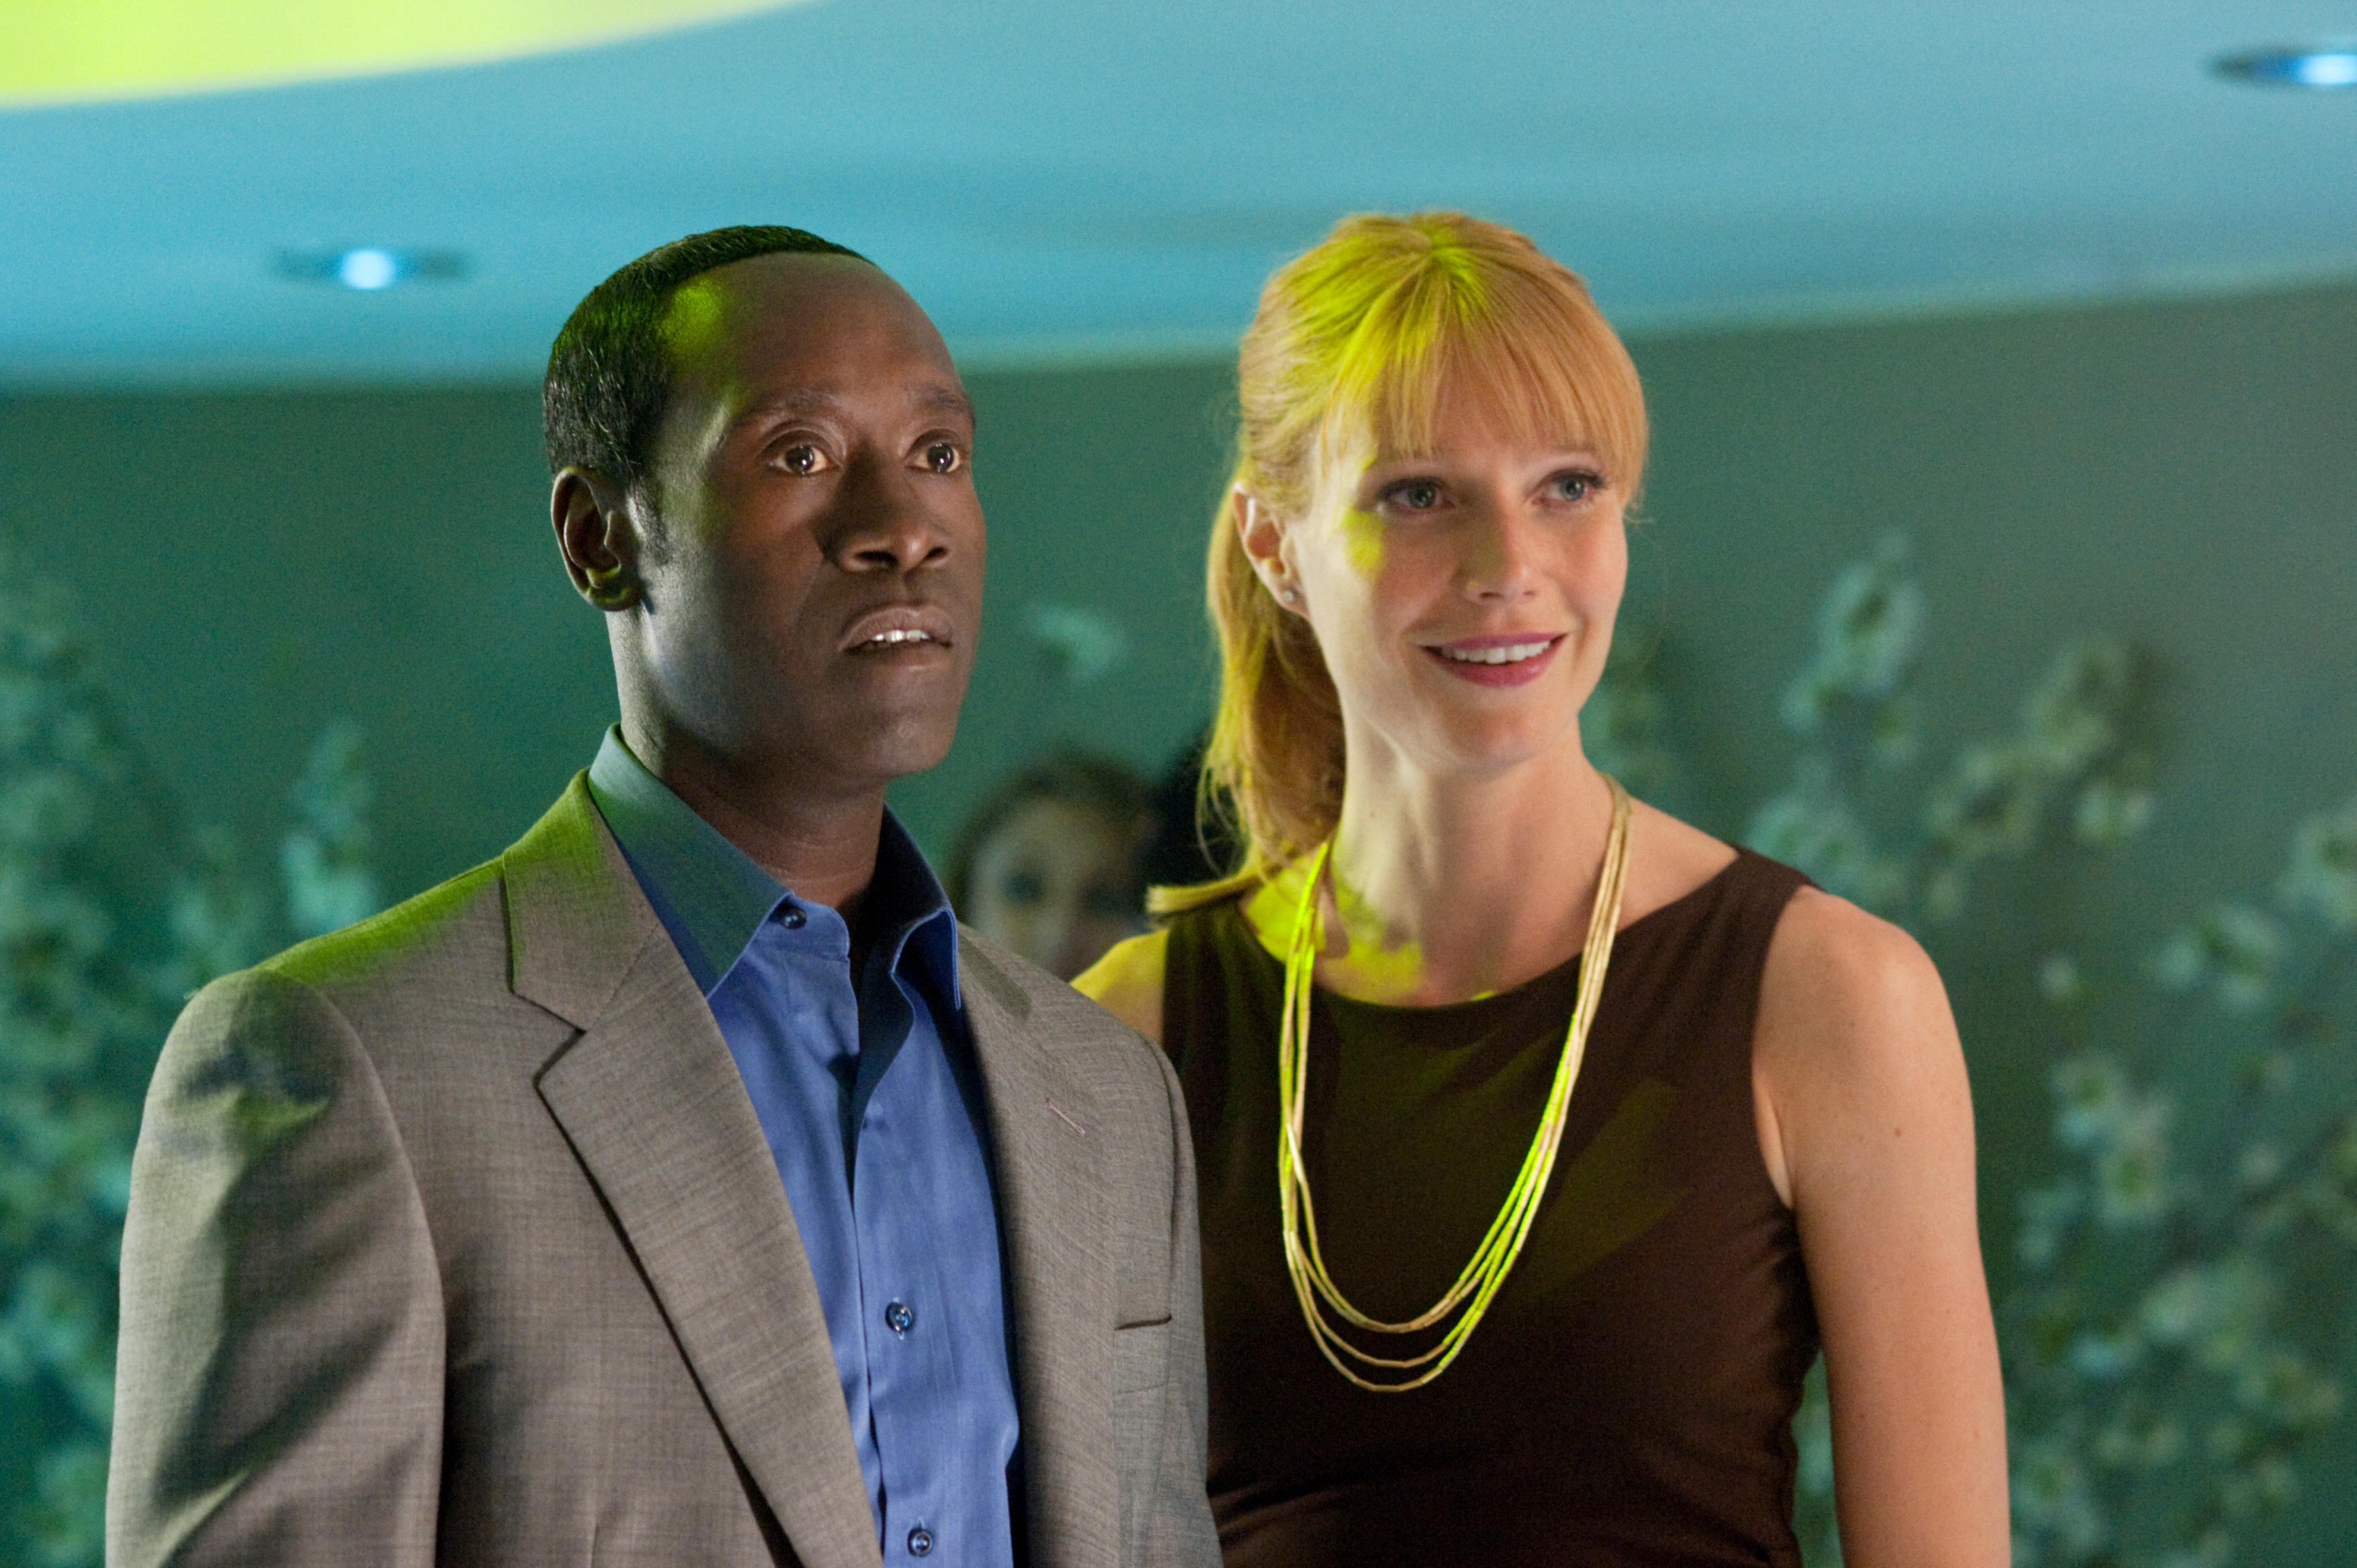 Don Cheadle stars as Col. James 'Rhodey' Rhodes and Gwyneth Paltrow stars as Pepper Potts in Paramount Pictures' Iron Man 2 (2010)